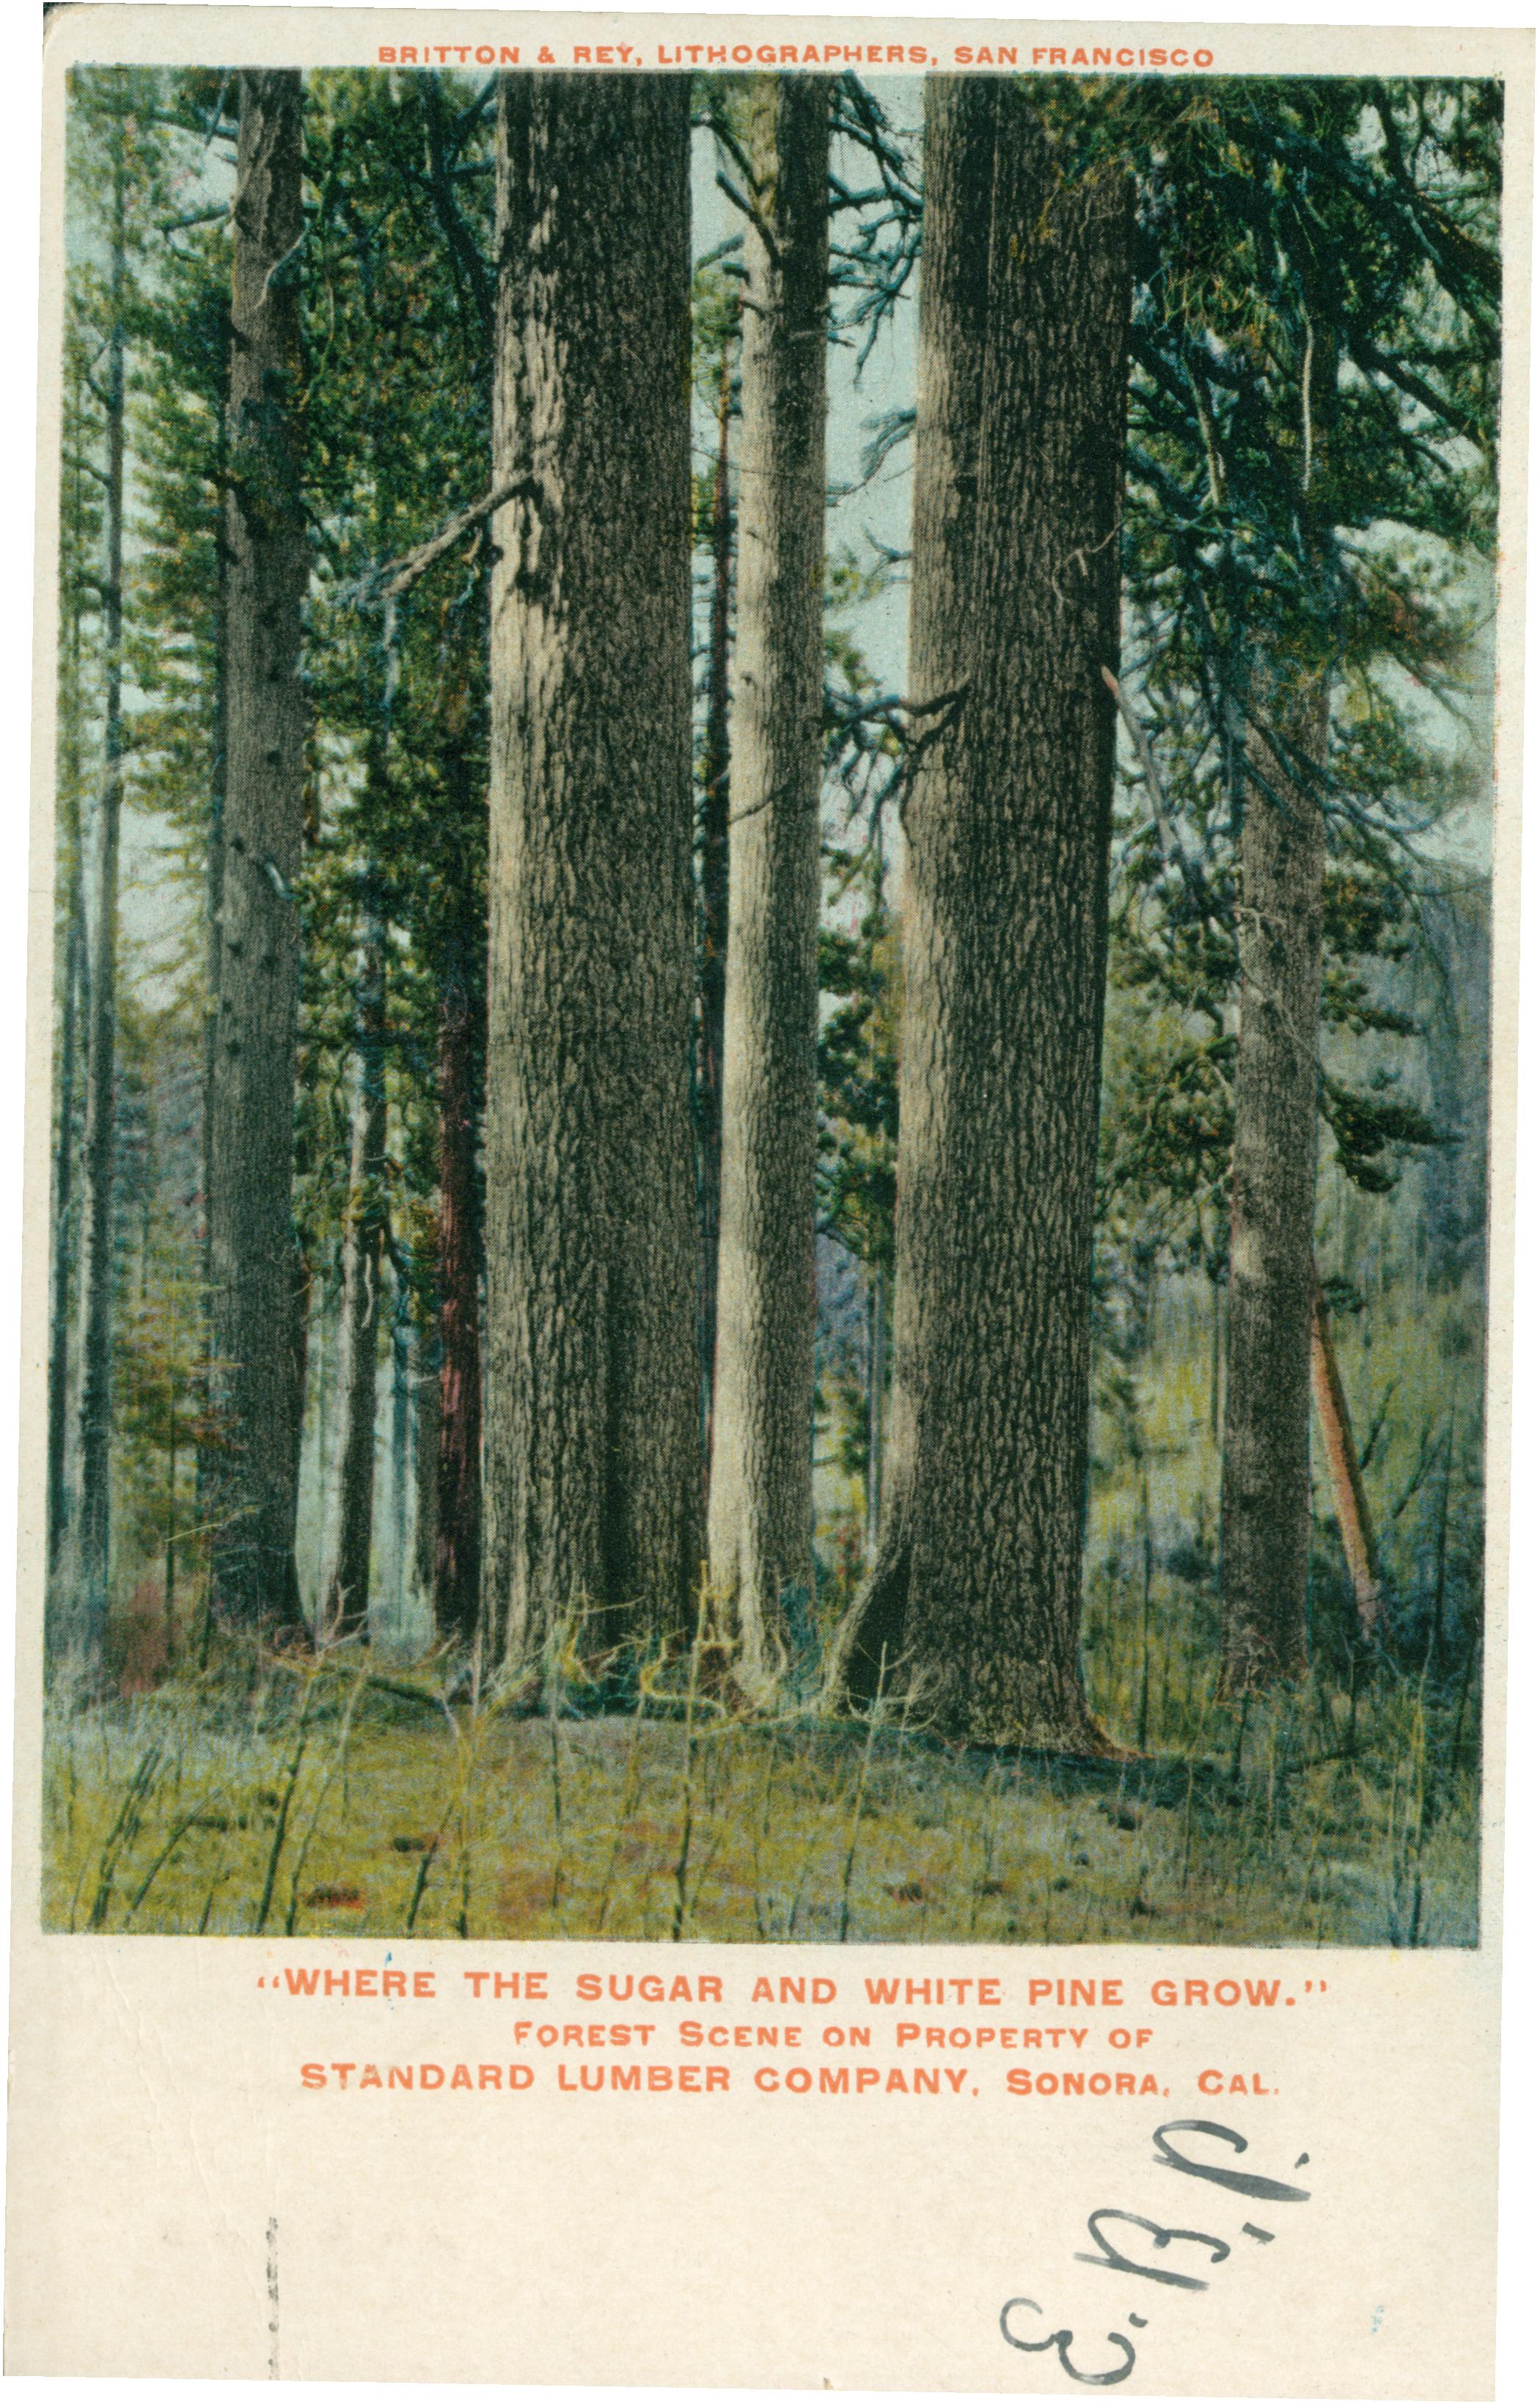 Shows a grove of several pine trees